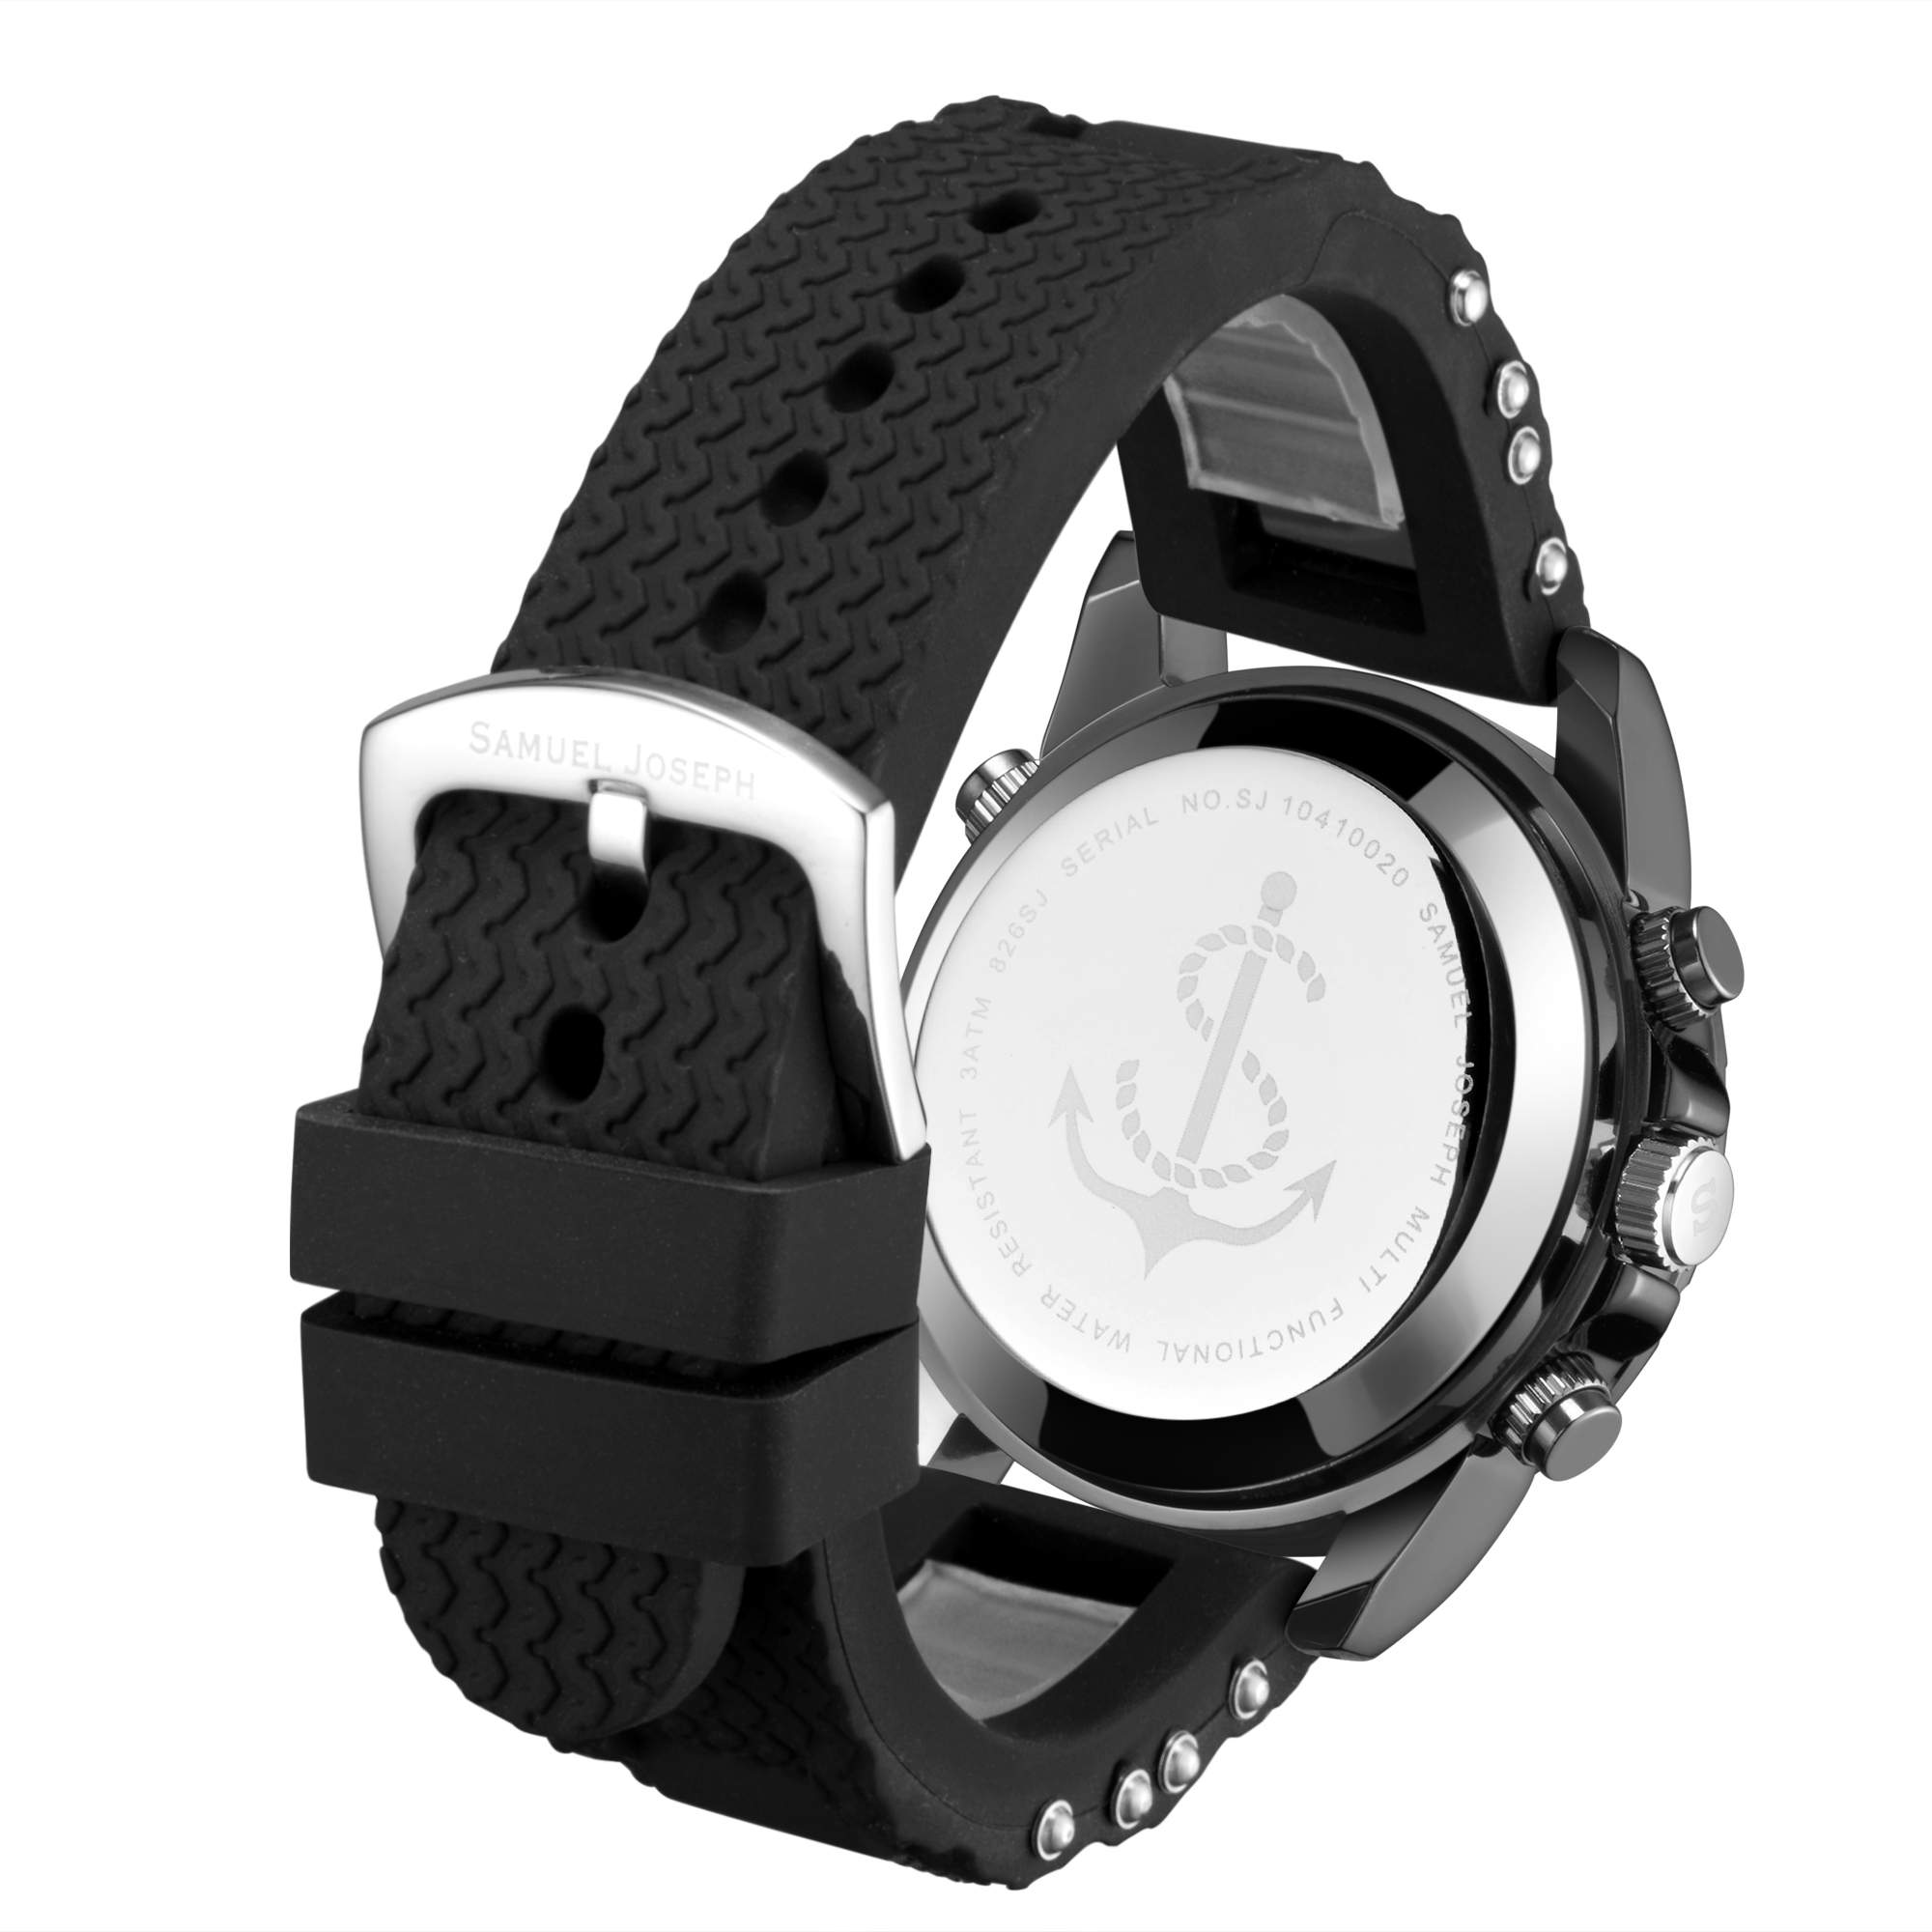 Samuel Joseph Limited Edition Multi Functional White Watch - Free Delivery & 2 Year Warranty - Image 4 of 5